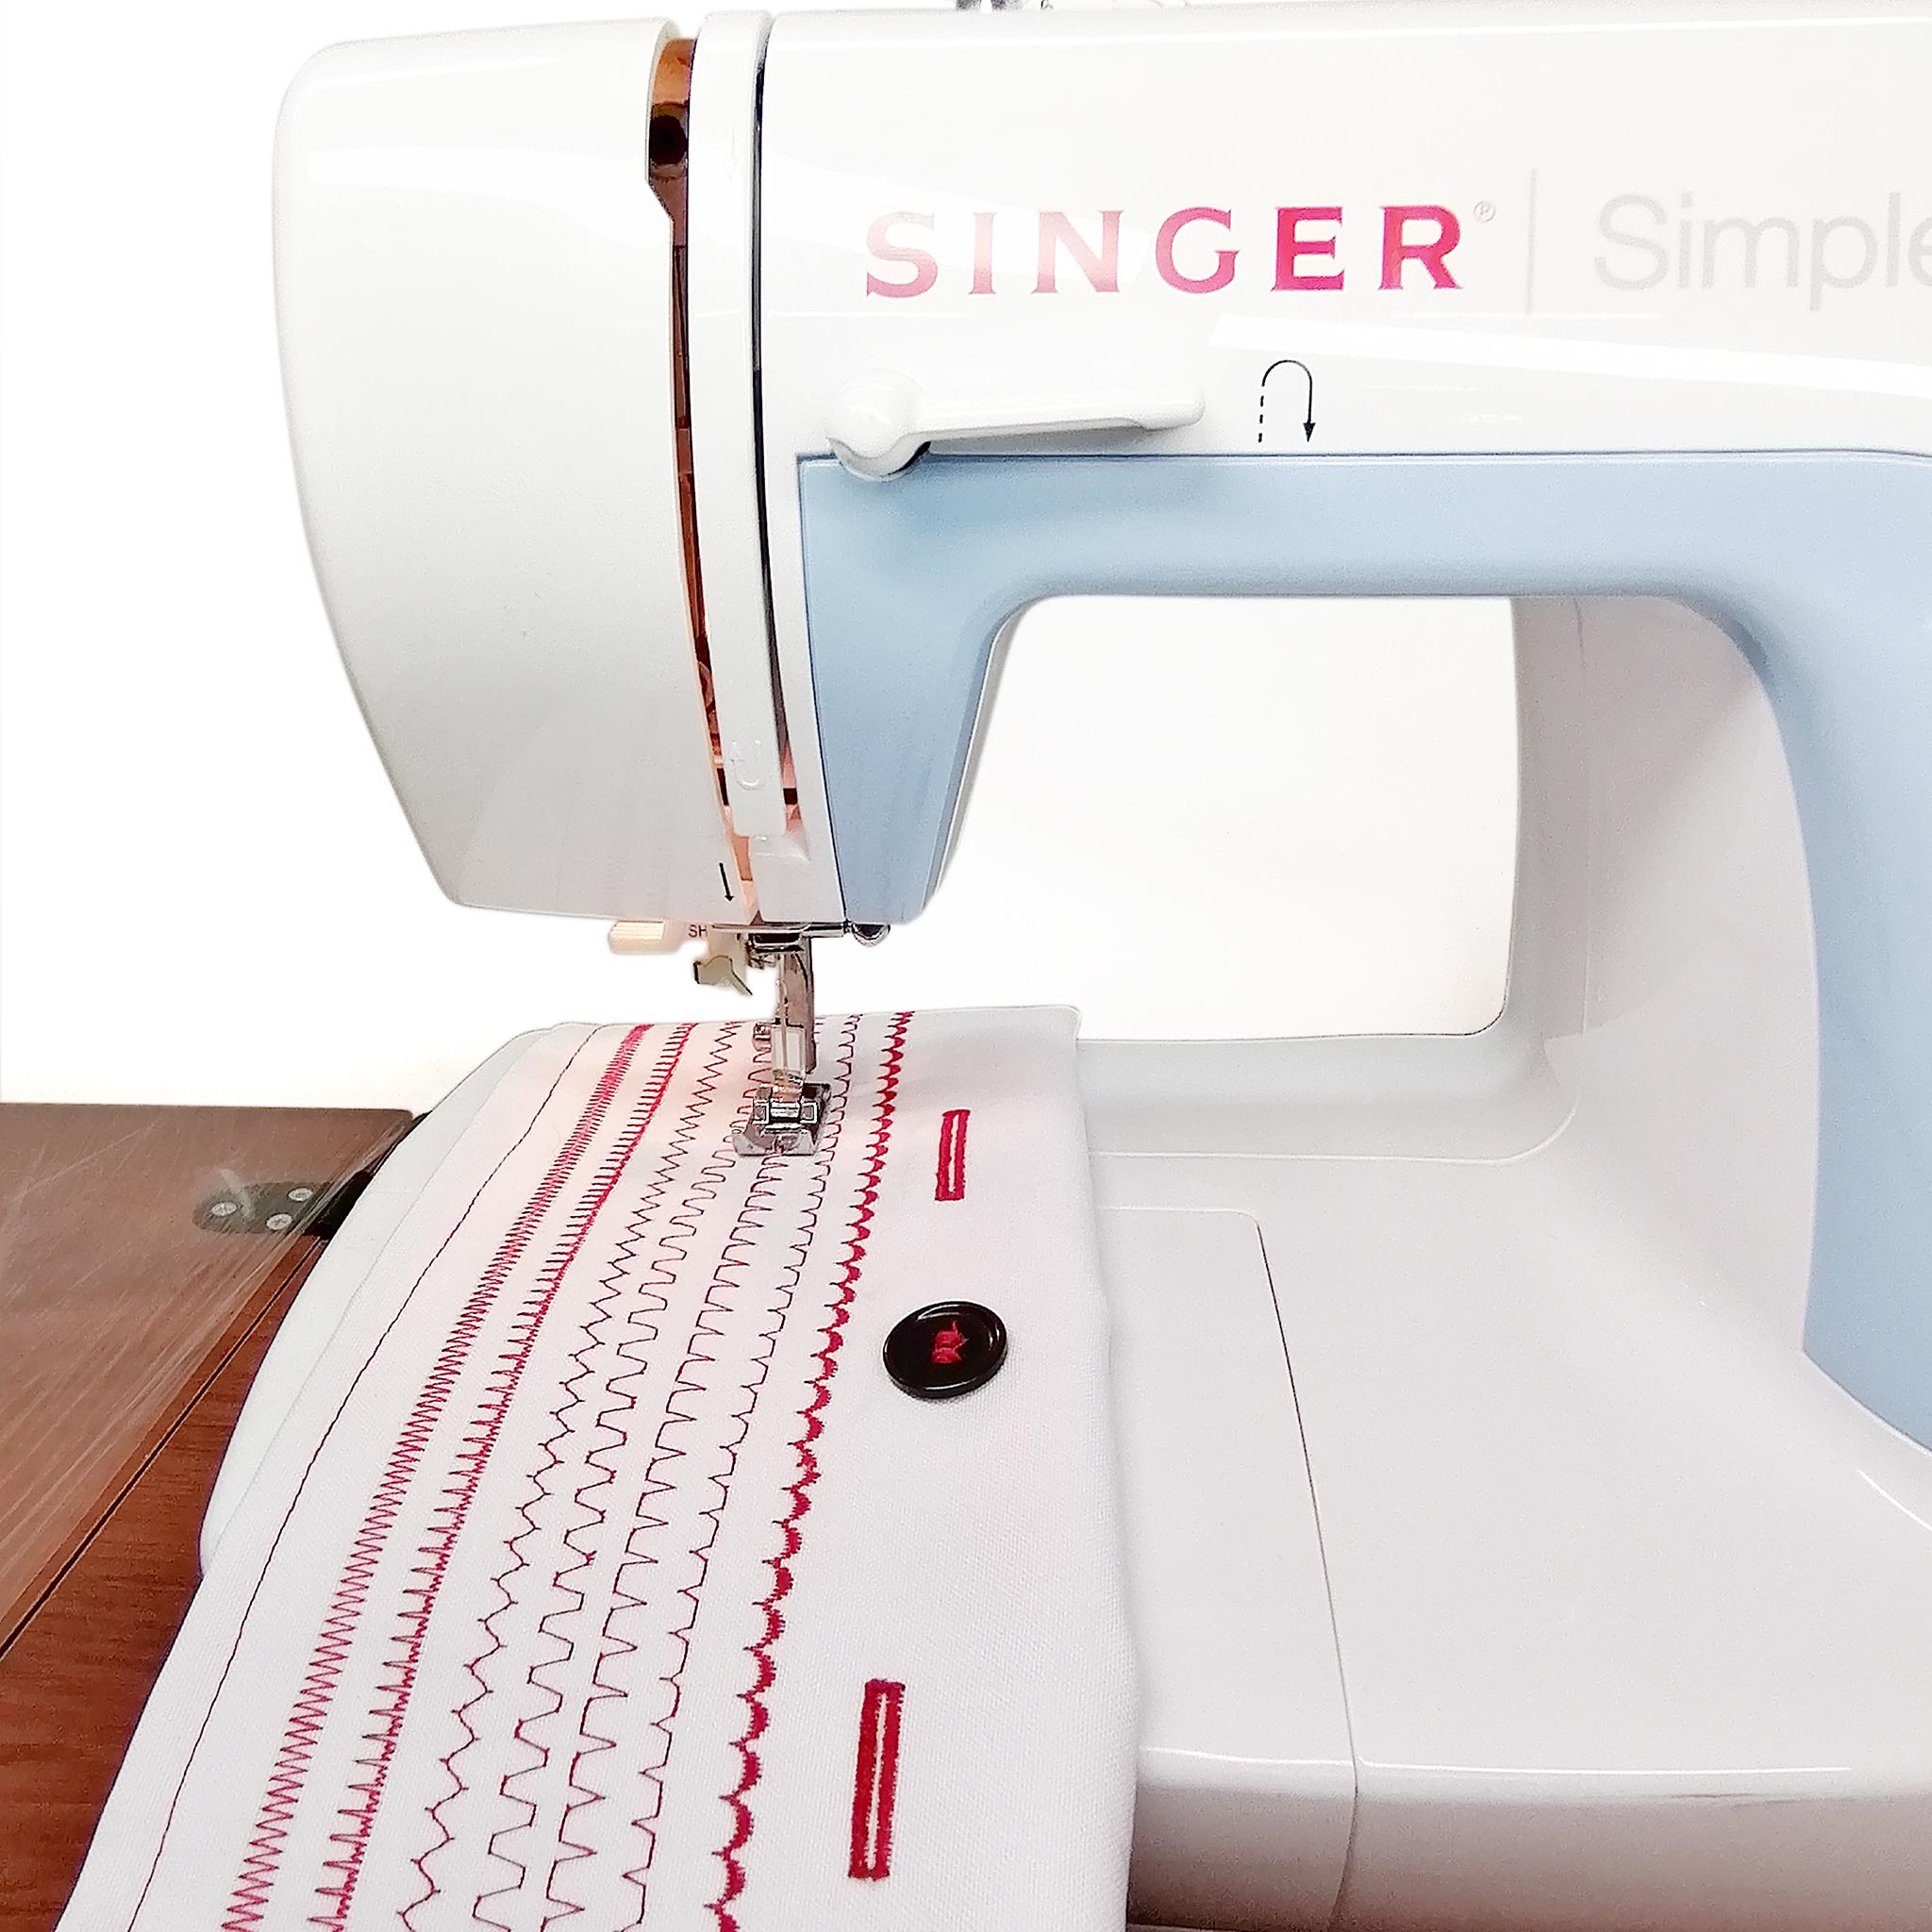 Singer Simple 3116 Electric Sewing Machine no Power, Pedal or